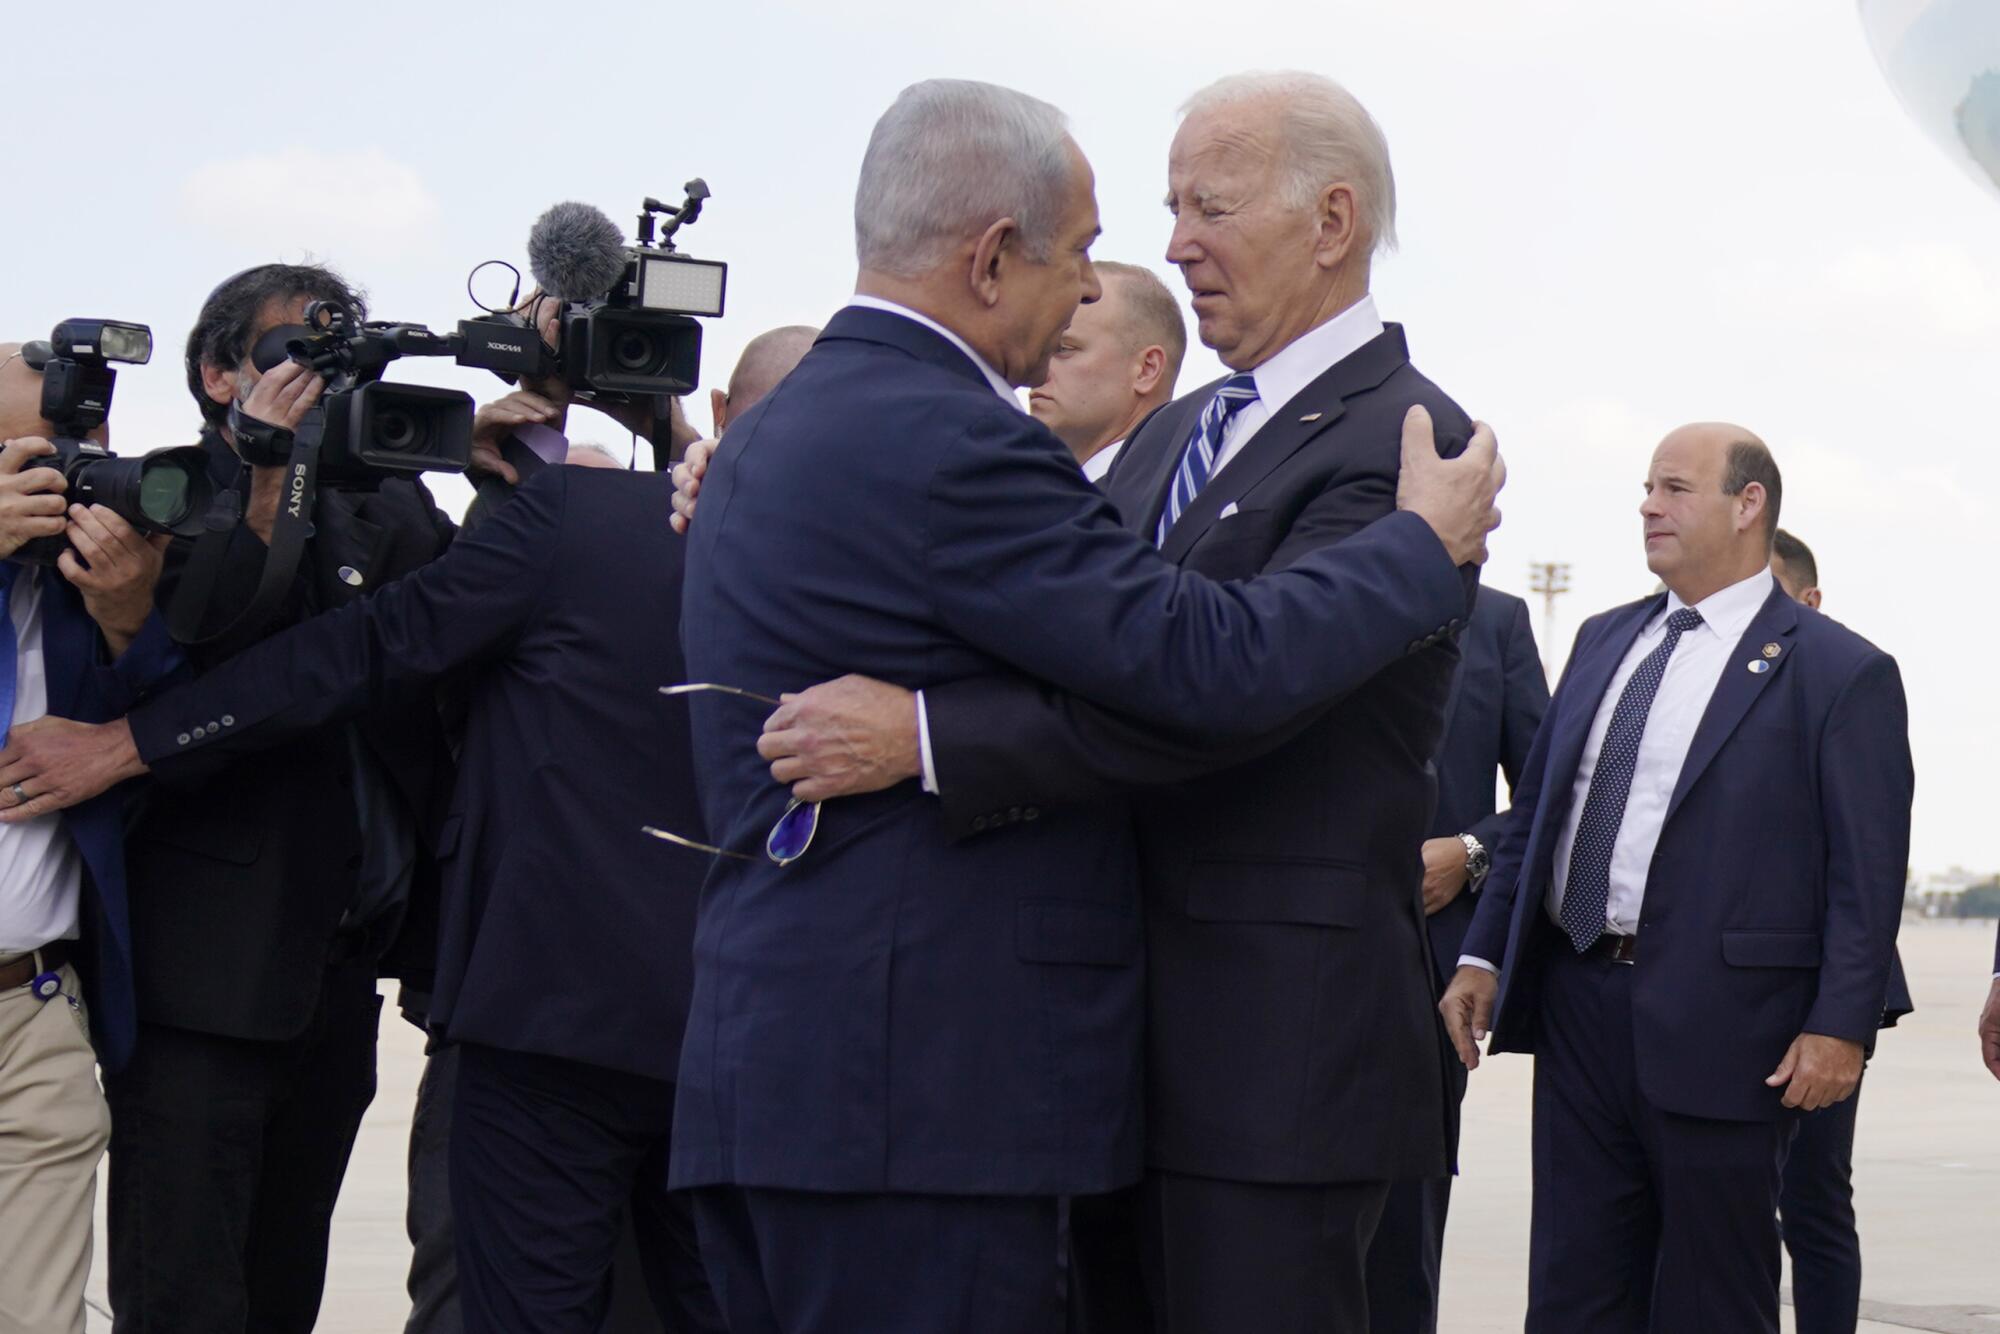 Two men in dark suits embrace near photographers 